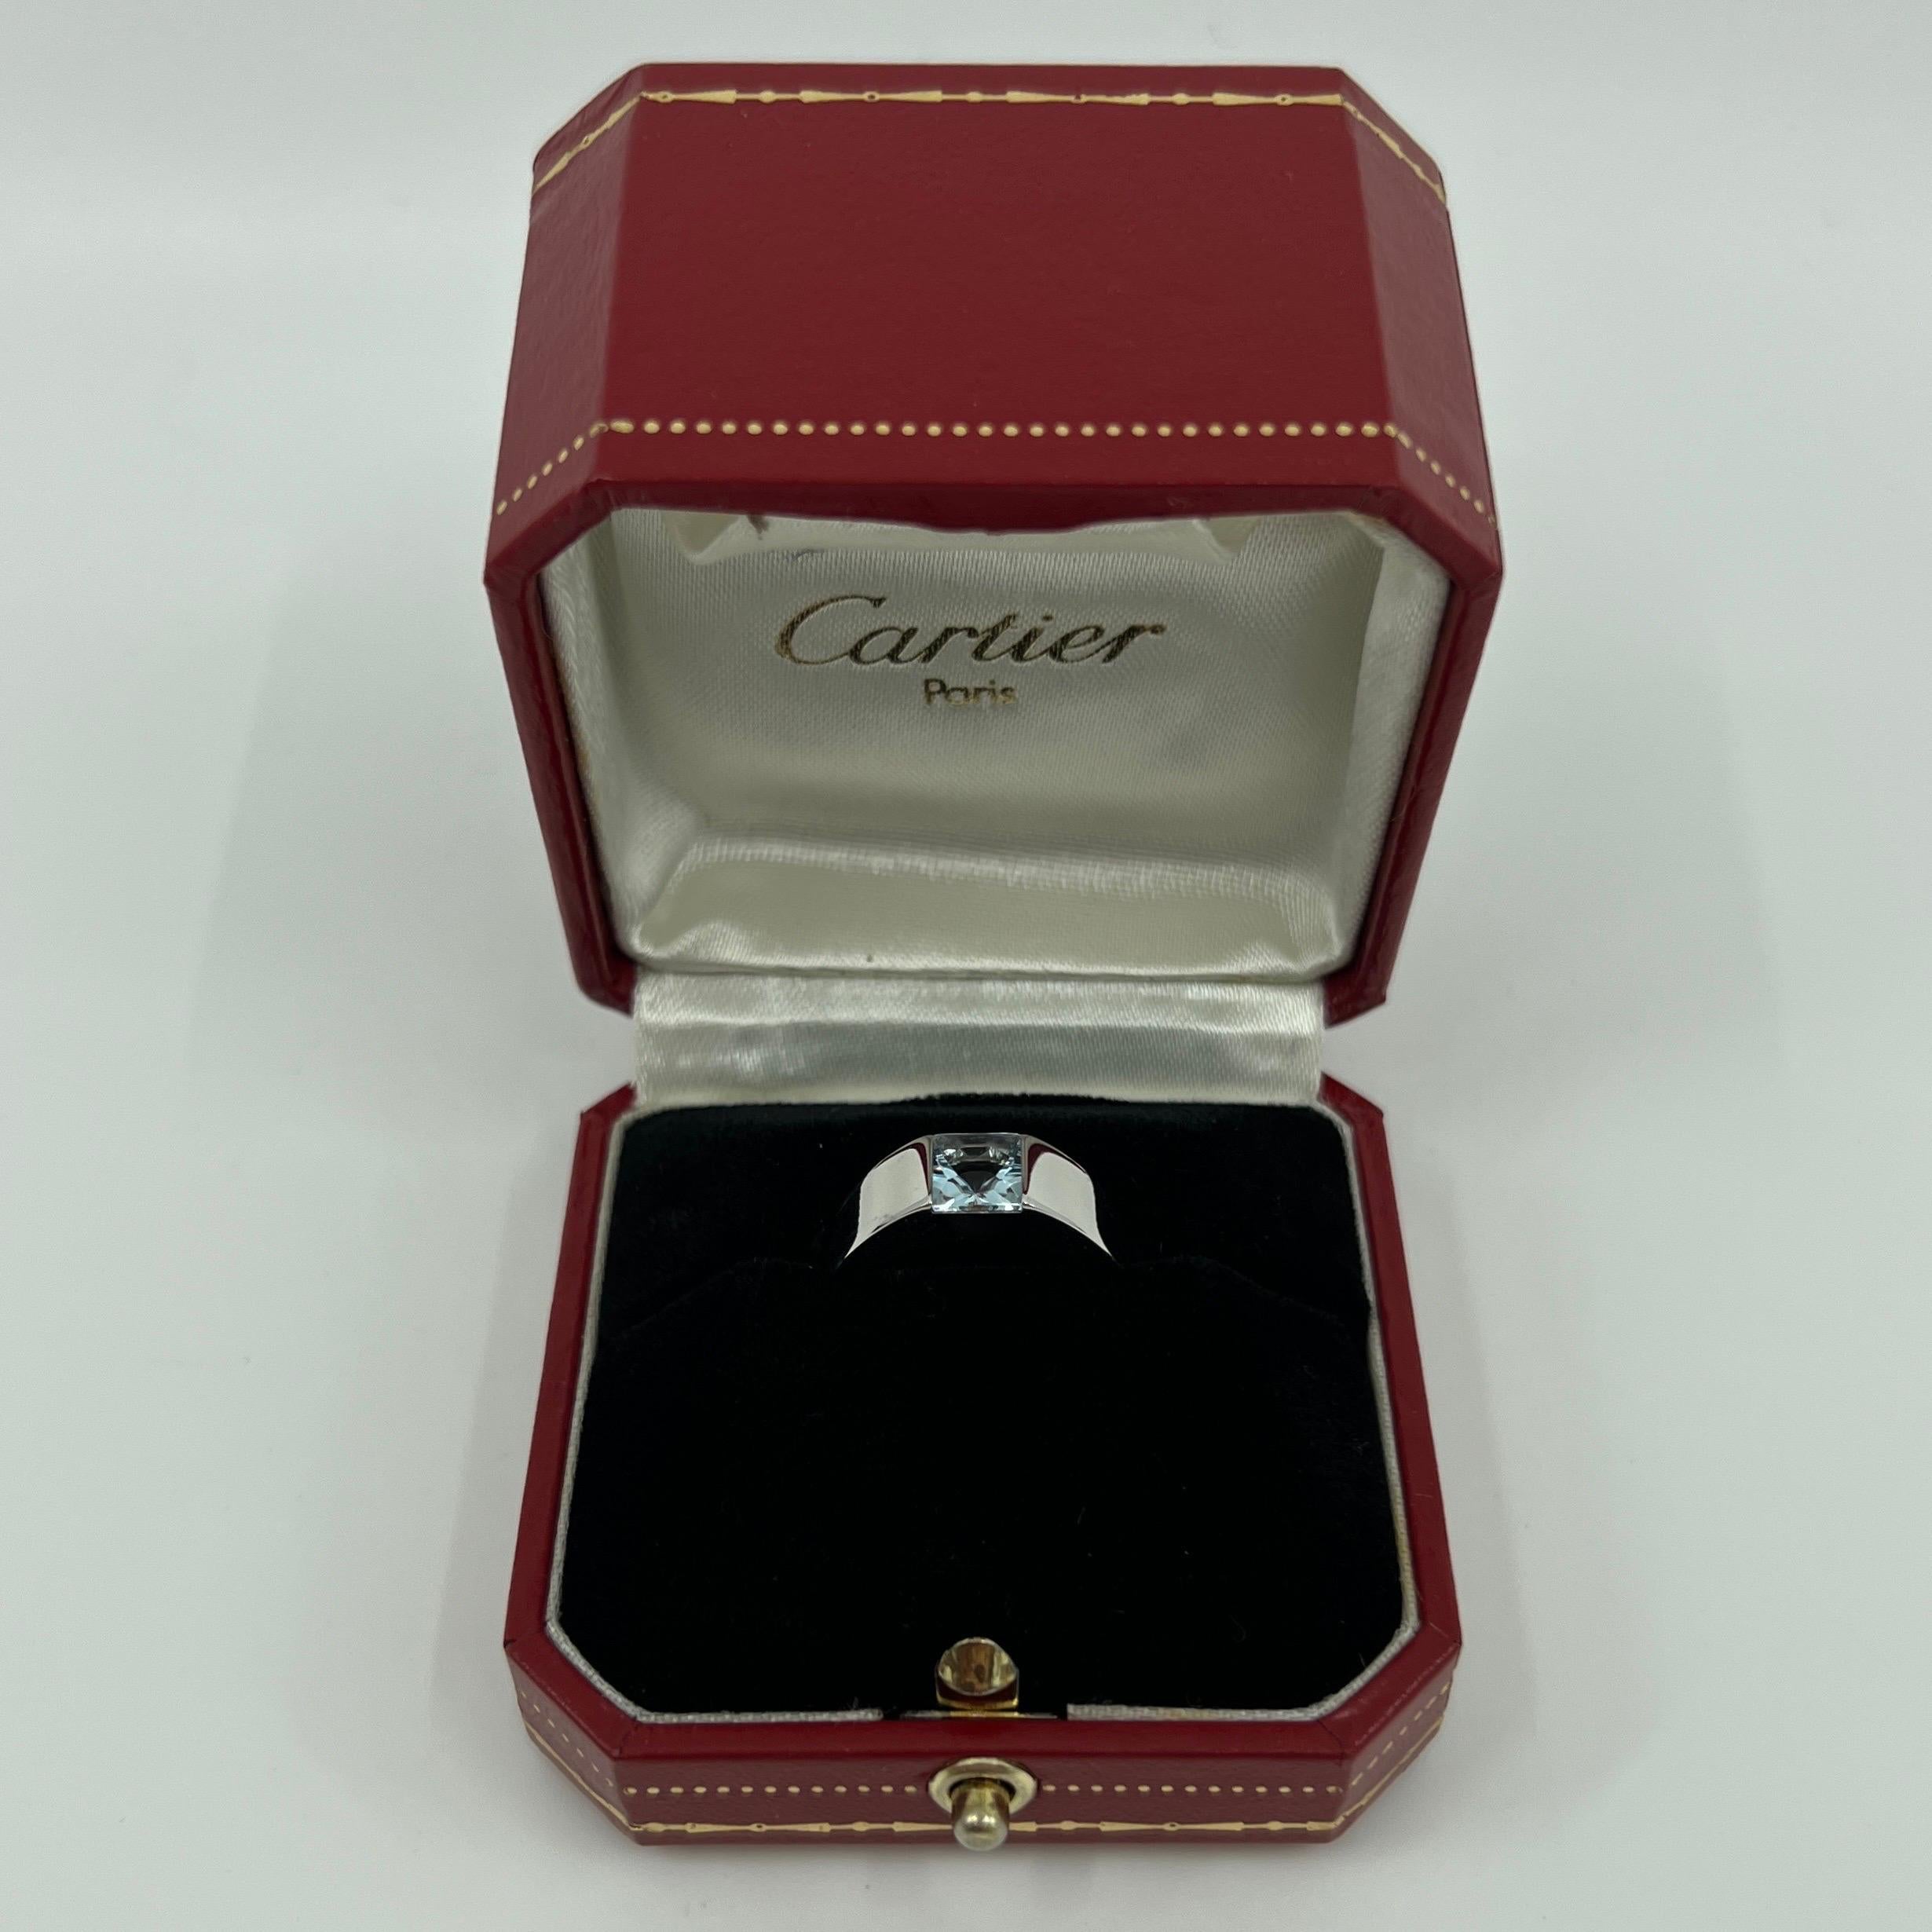 Vintage Cartier Fine Blue Aquamarine 18 Karat White Gold Tank Ring.

Stunning white gold ring with a 6mm tension set fine blue aquamarine. 
High end jewellery houses like Cartier only use the finest of gemstones in their jewellery and this